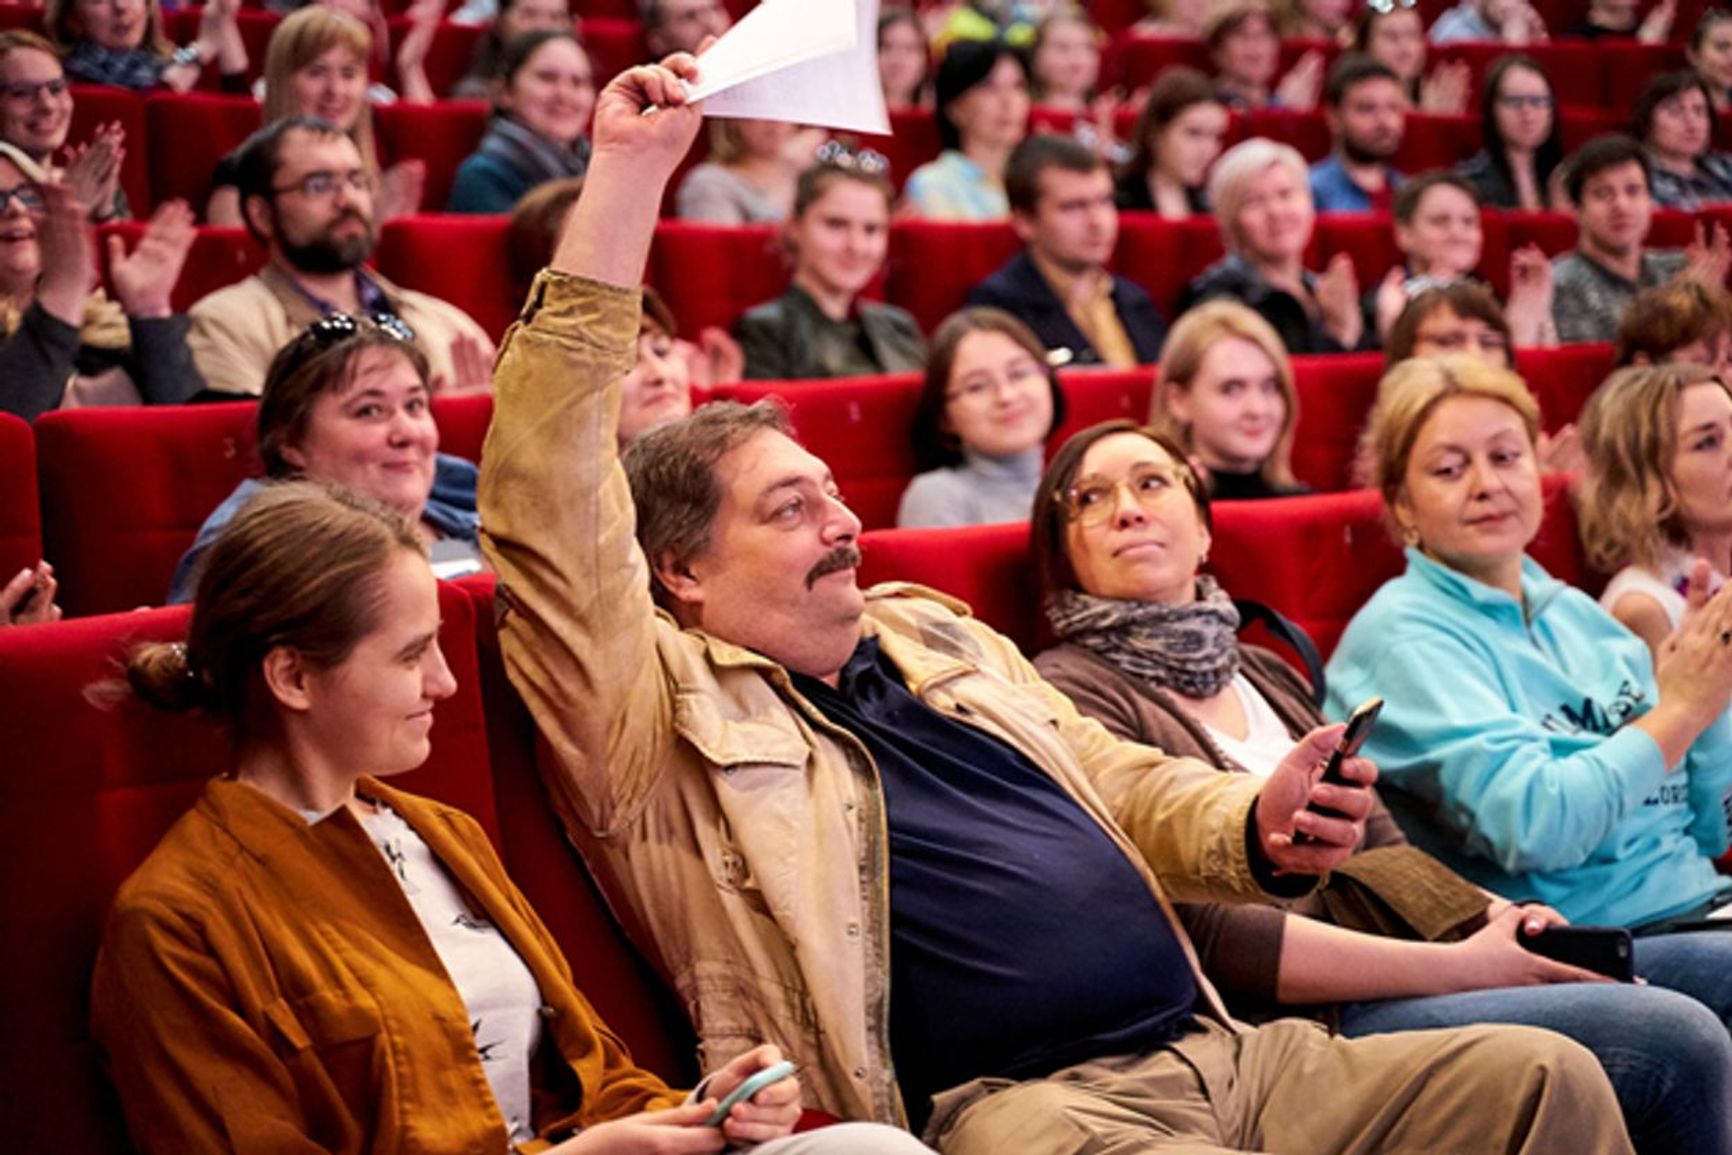 From left to right: Ekaterina Kevkhishvili and Dmitry Bykov in the Pobeda auditorium on that very day